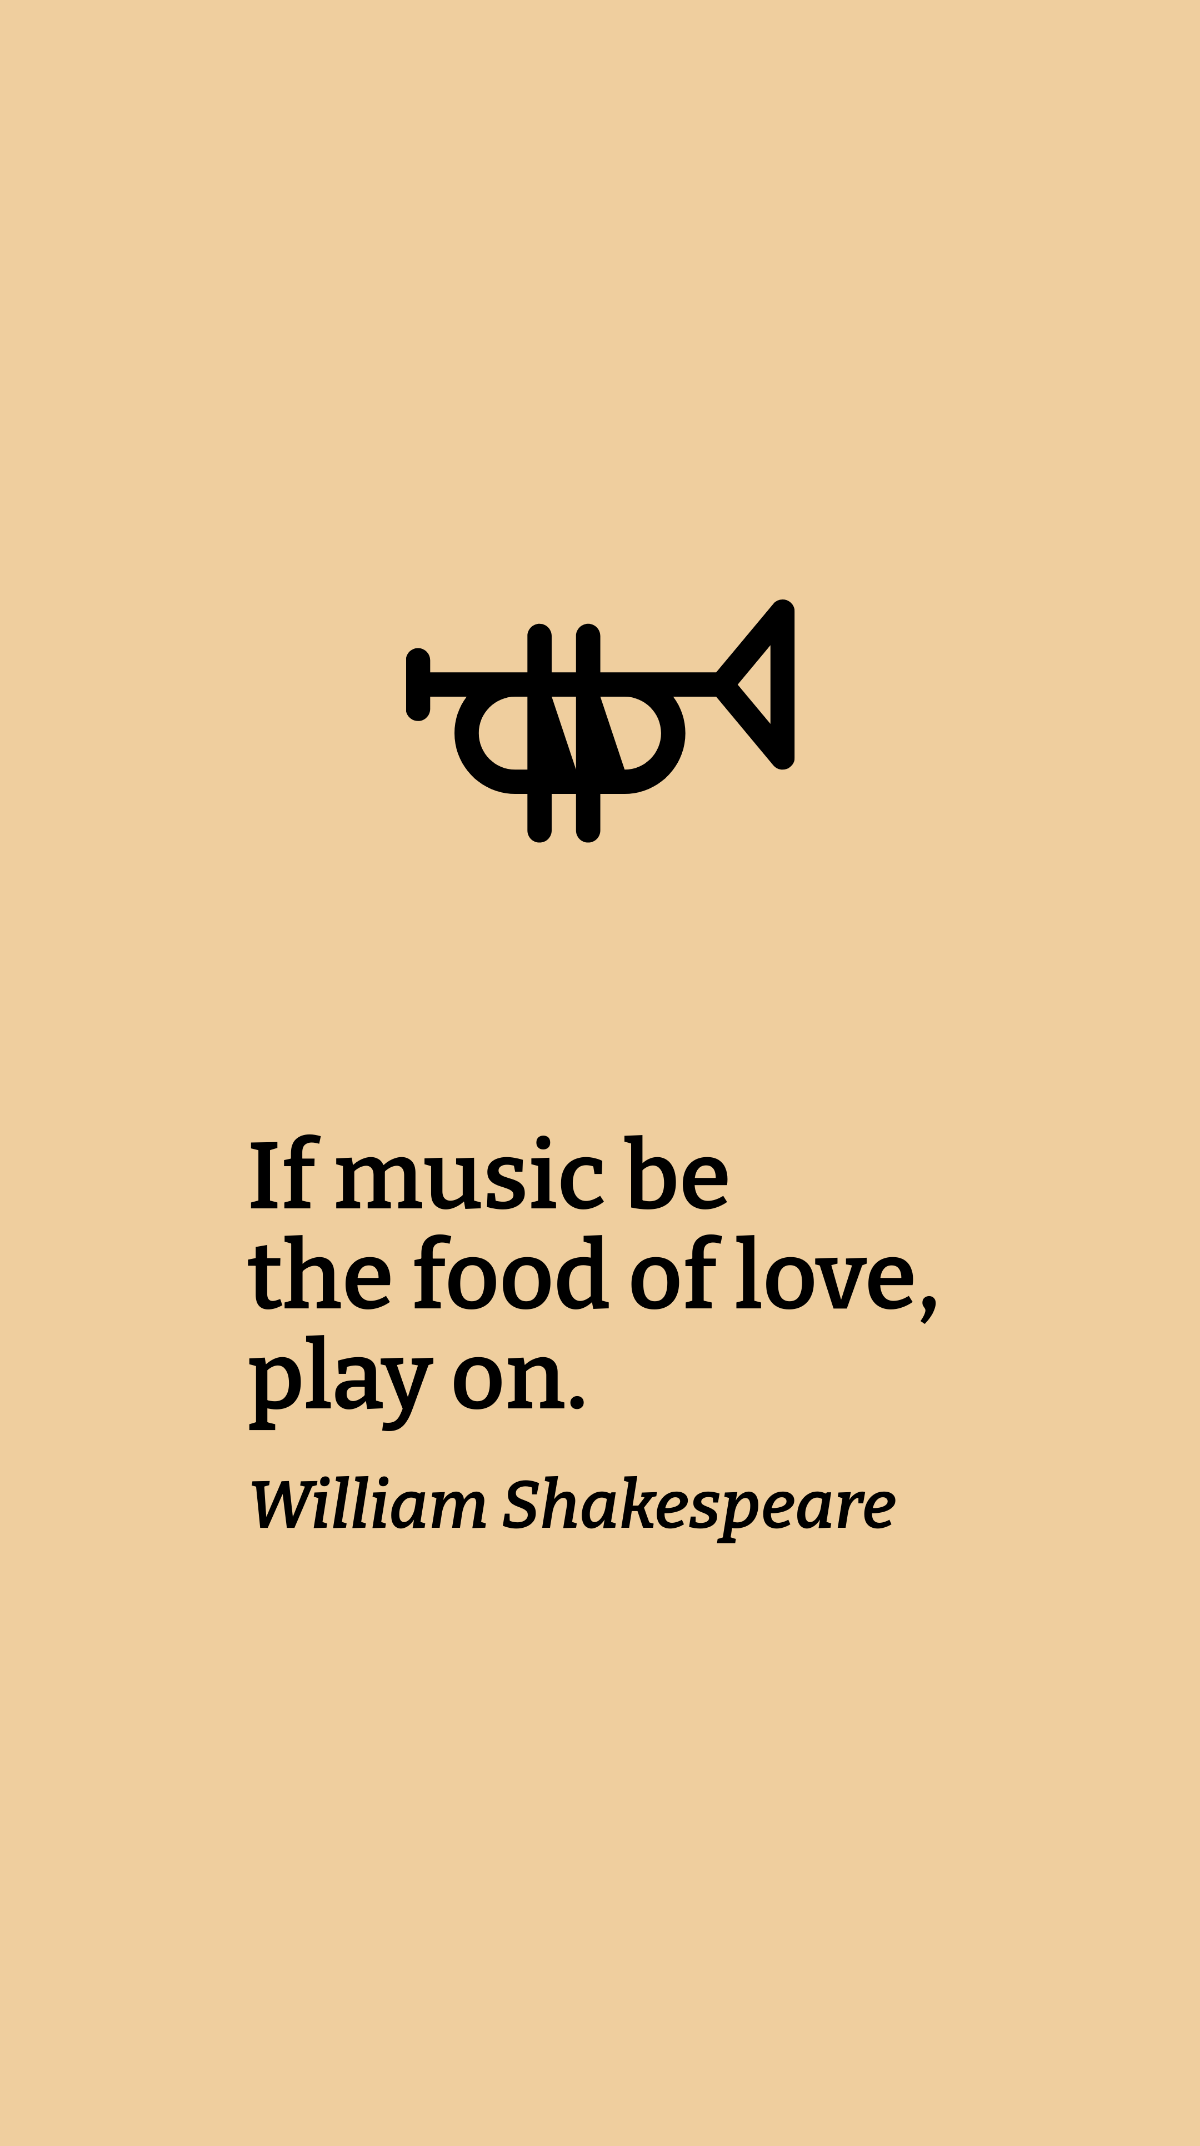 William Shakespeare - If music be the food of love, play on. Template